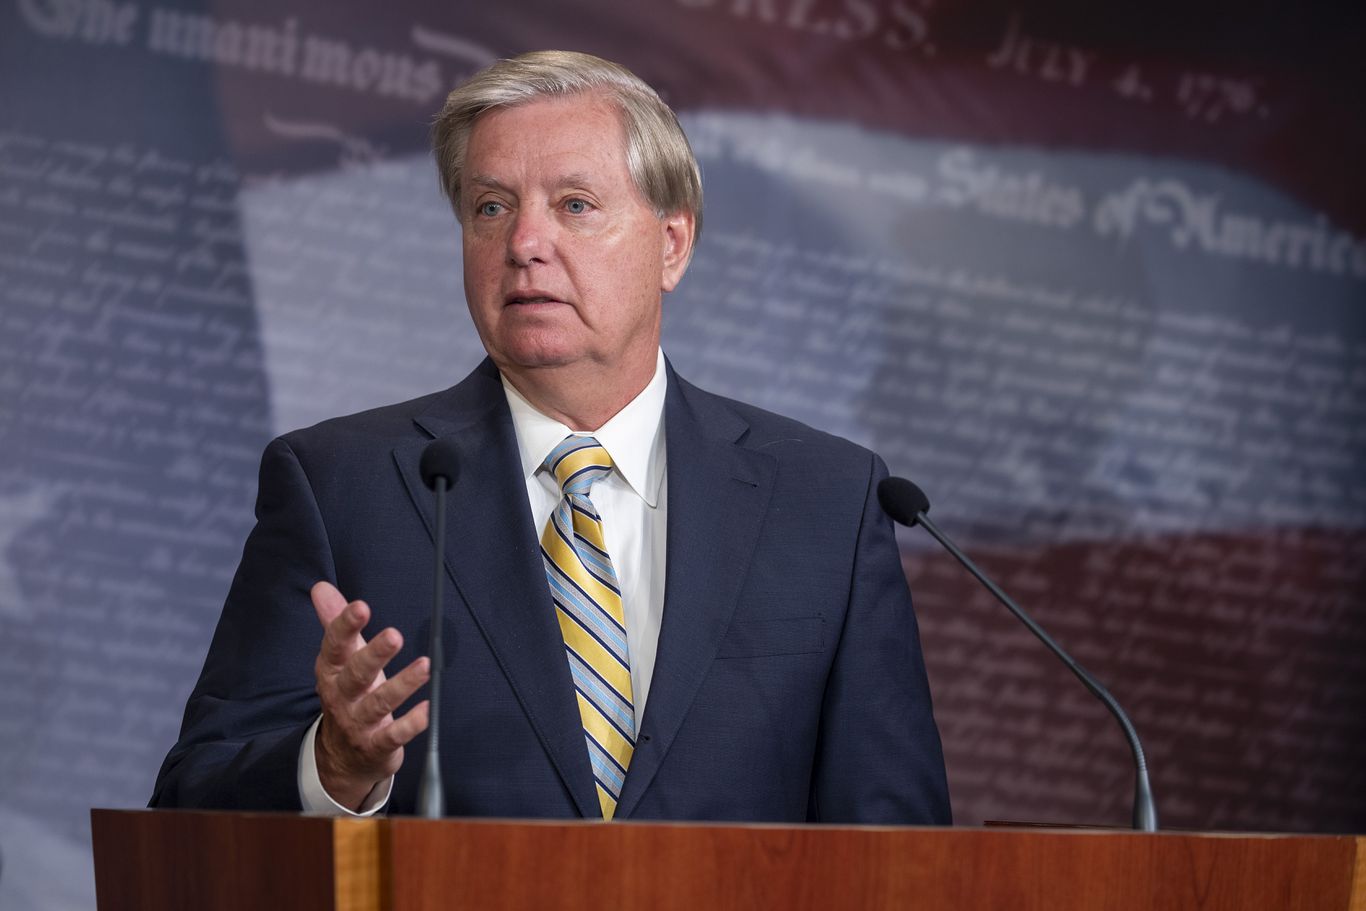 Republicans dumping $10 million to assist Lindsey in SC…